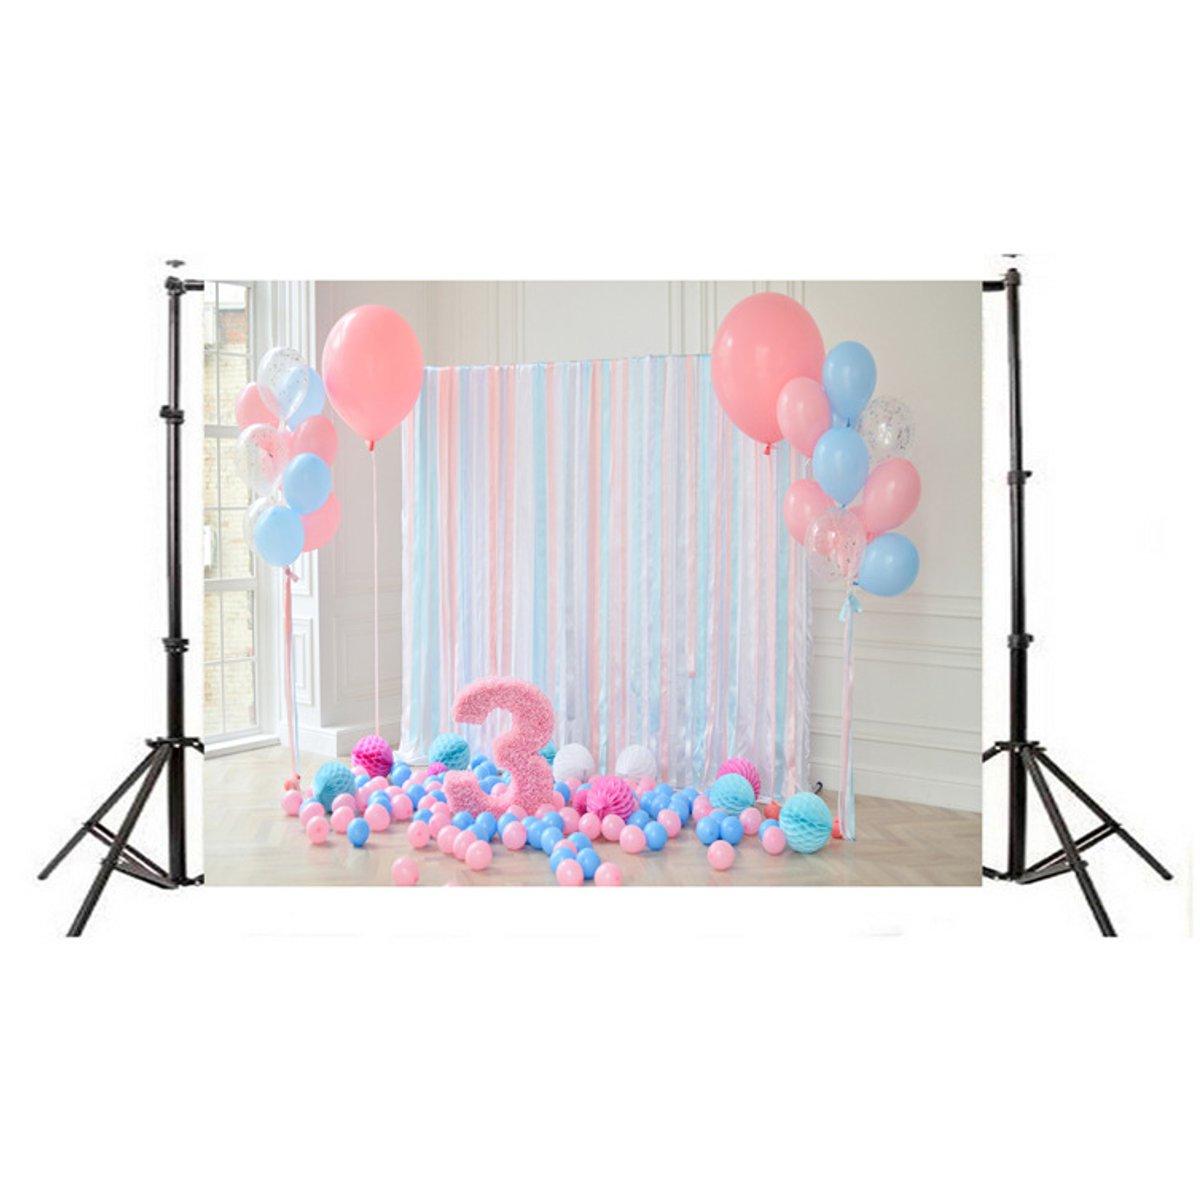 5x3FT 7x5FT 9x6FT Vinyl Pink Blue Balloon 3 Years Old Birthday Photography Backdrop Background Studi